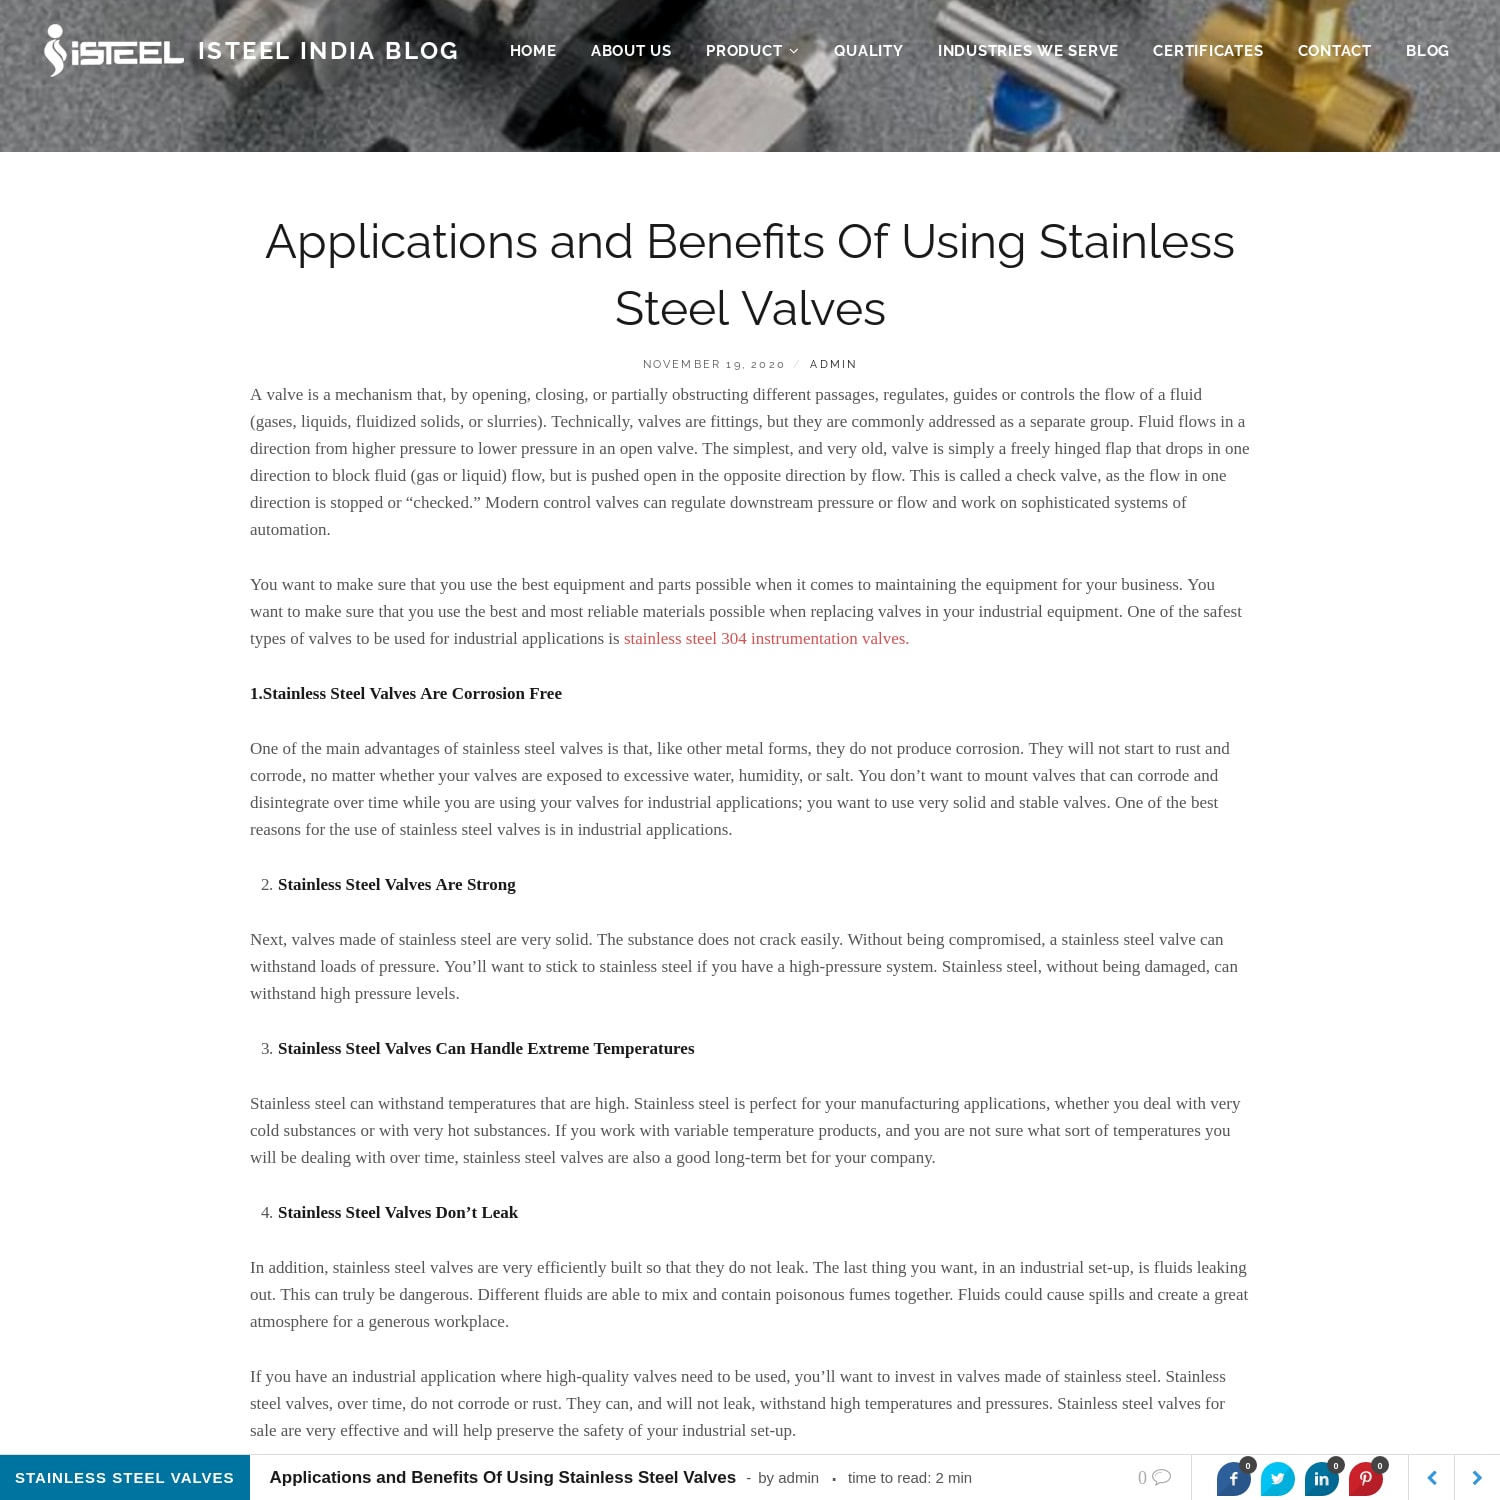 Applications and Benefits Of Using Stainless Steel Valves